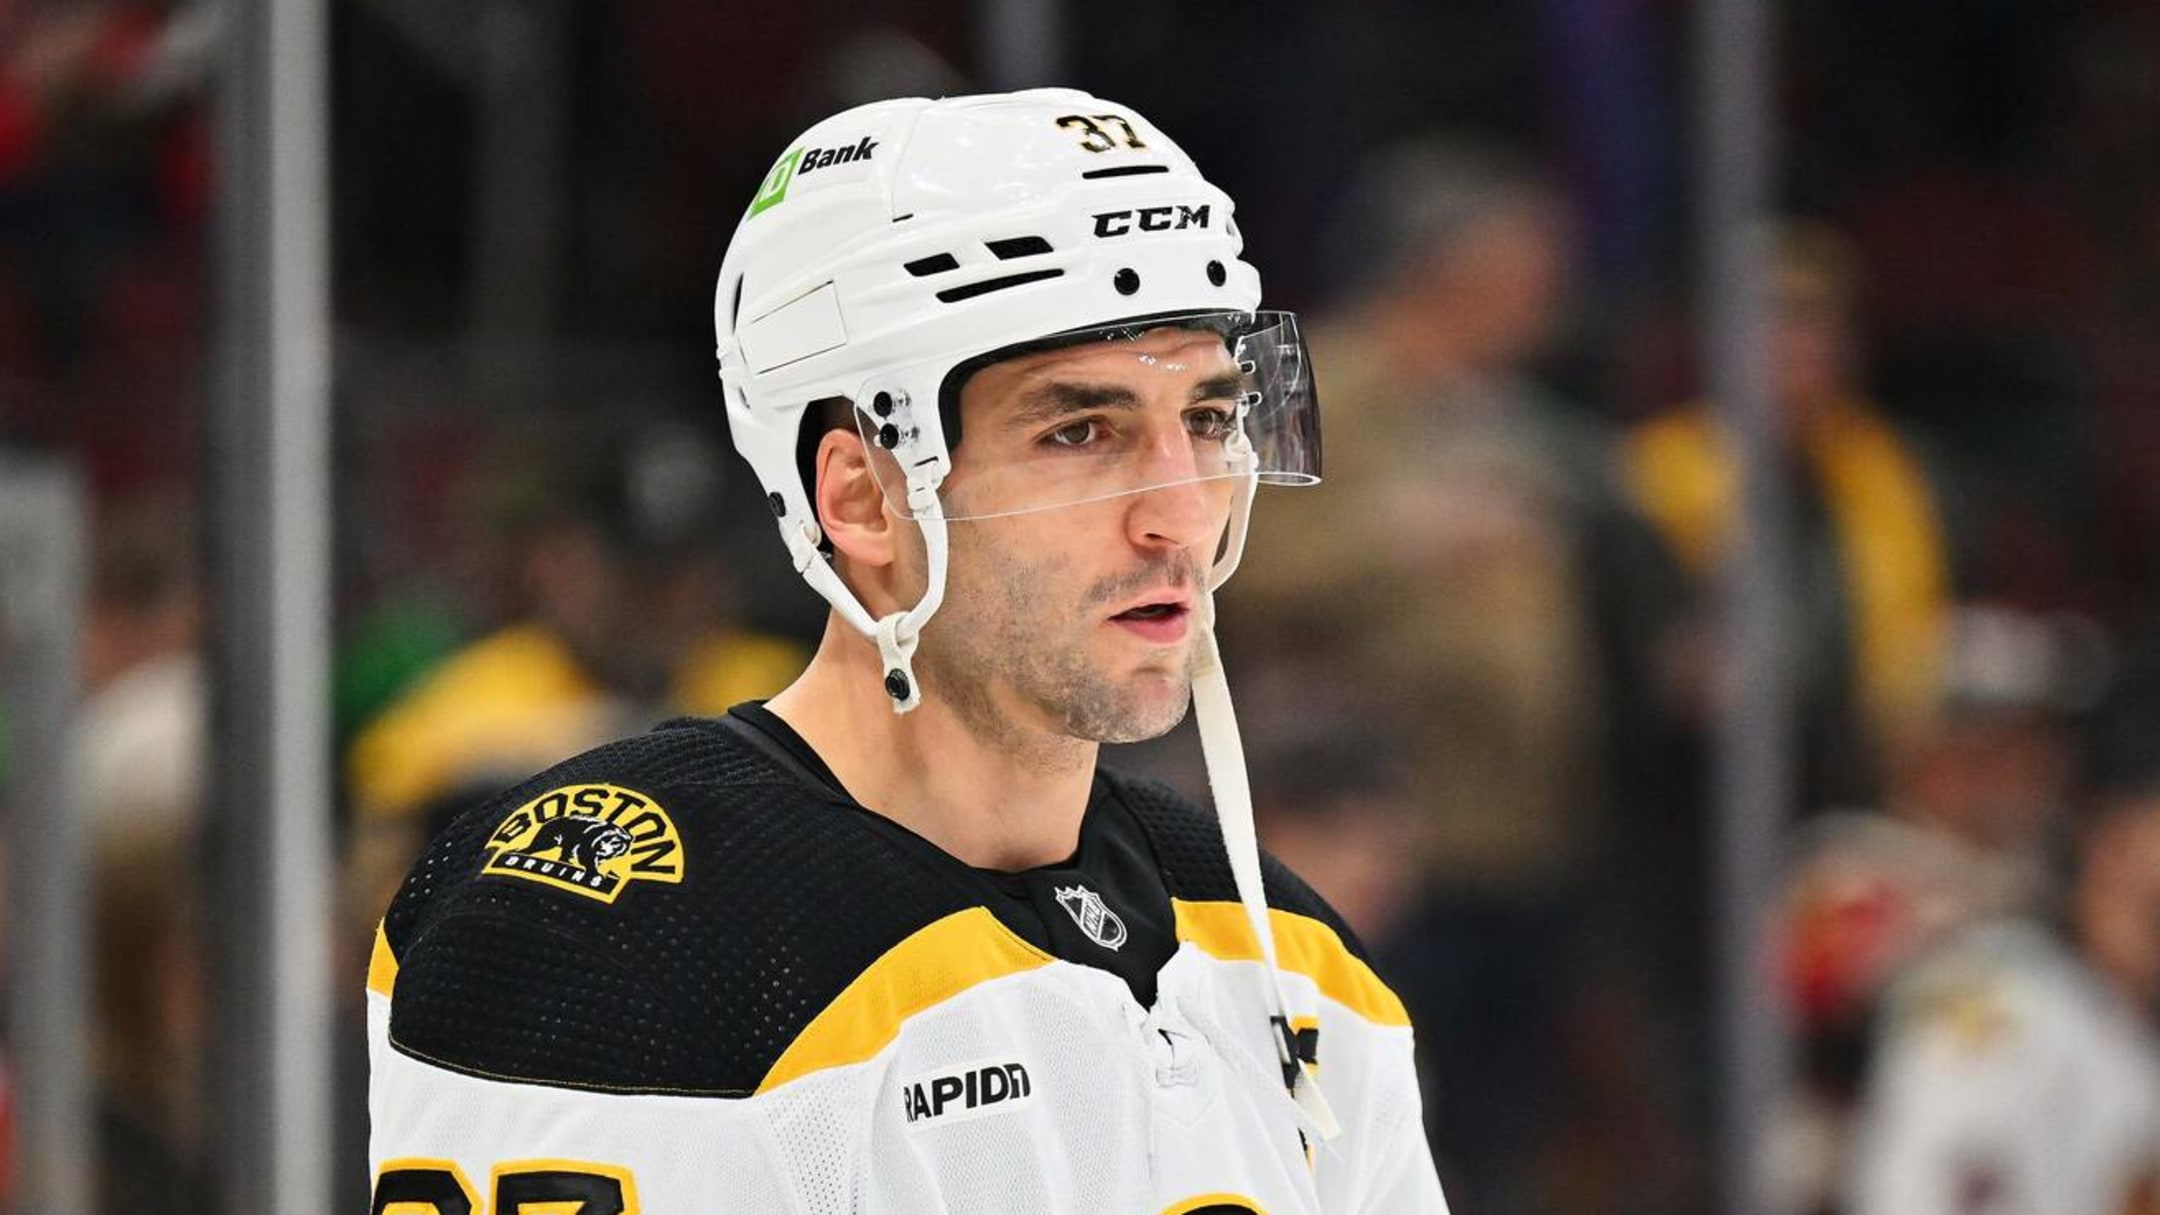 Imagining the Future of Bruins Forward Patrice Bergeron From His